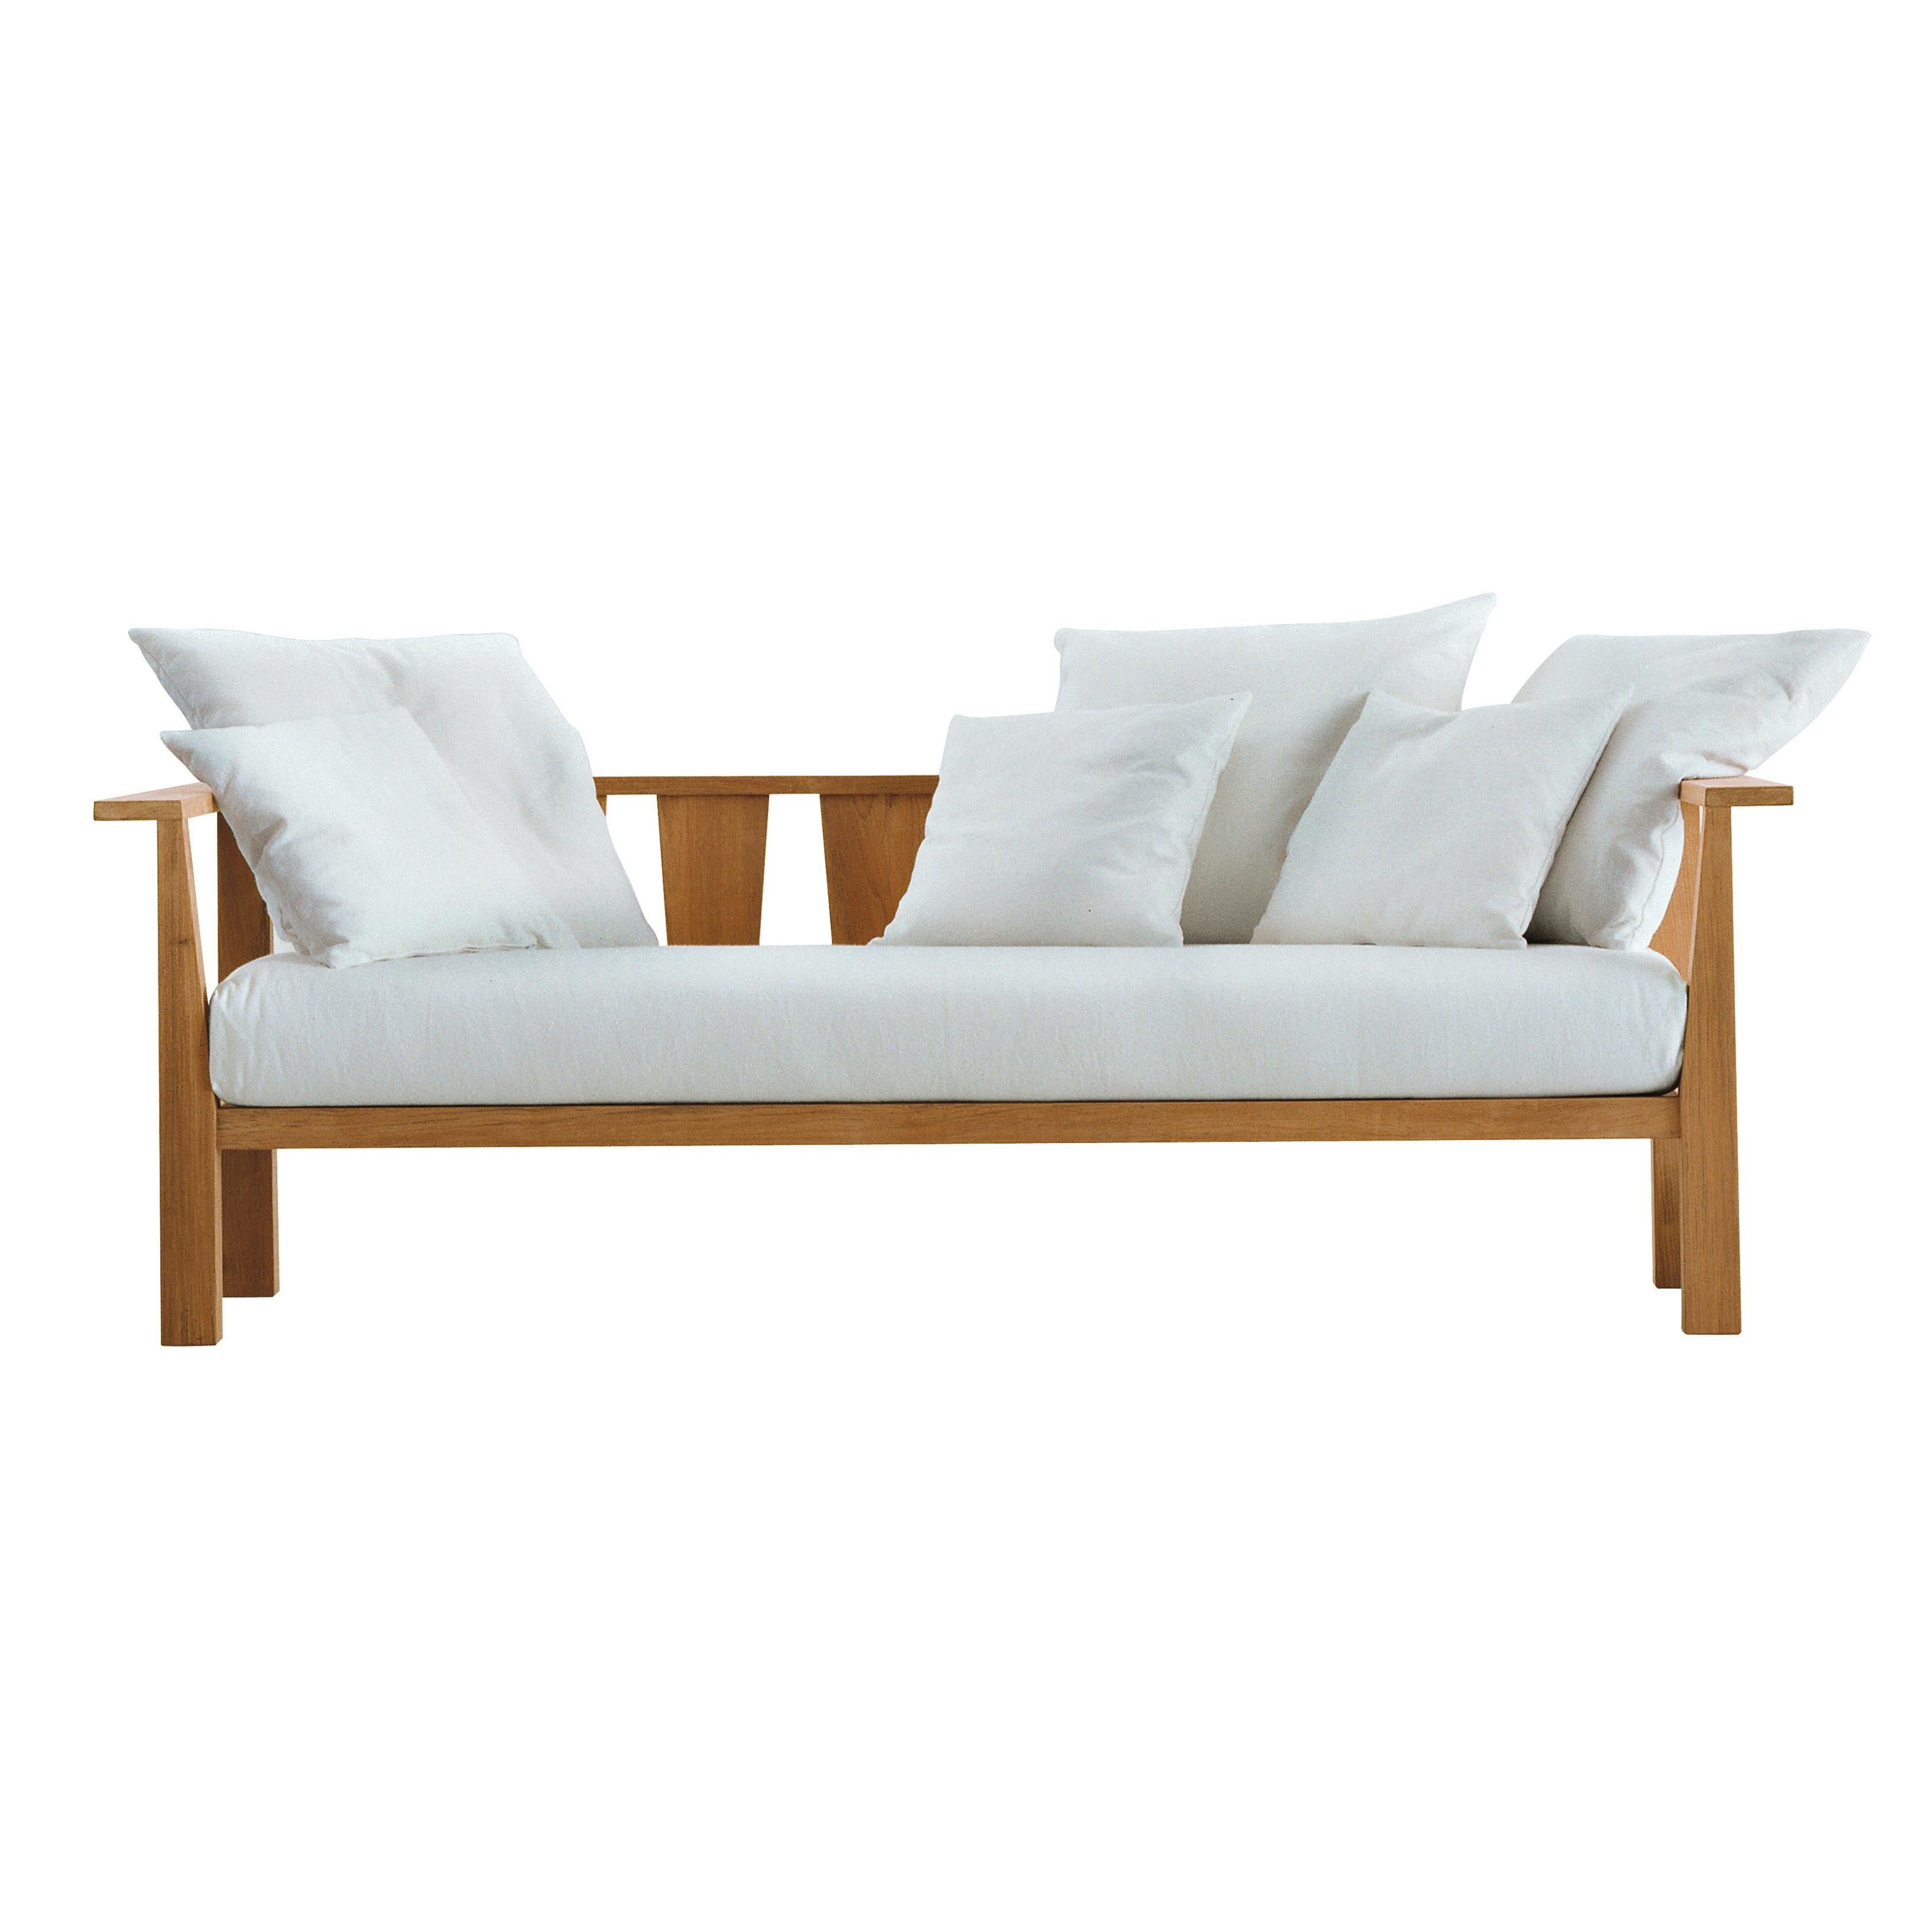 Gervasoni Small Inout Sofa in Aspen 03 Upholstery with Natural Teak Frame For Sale